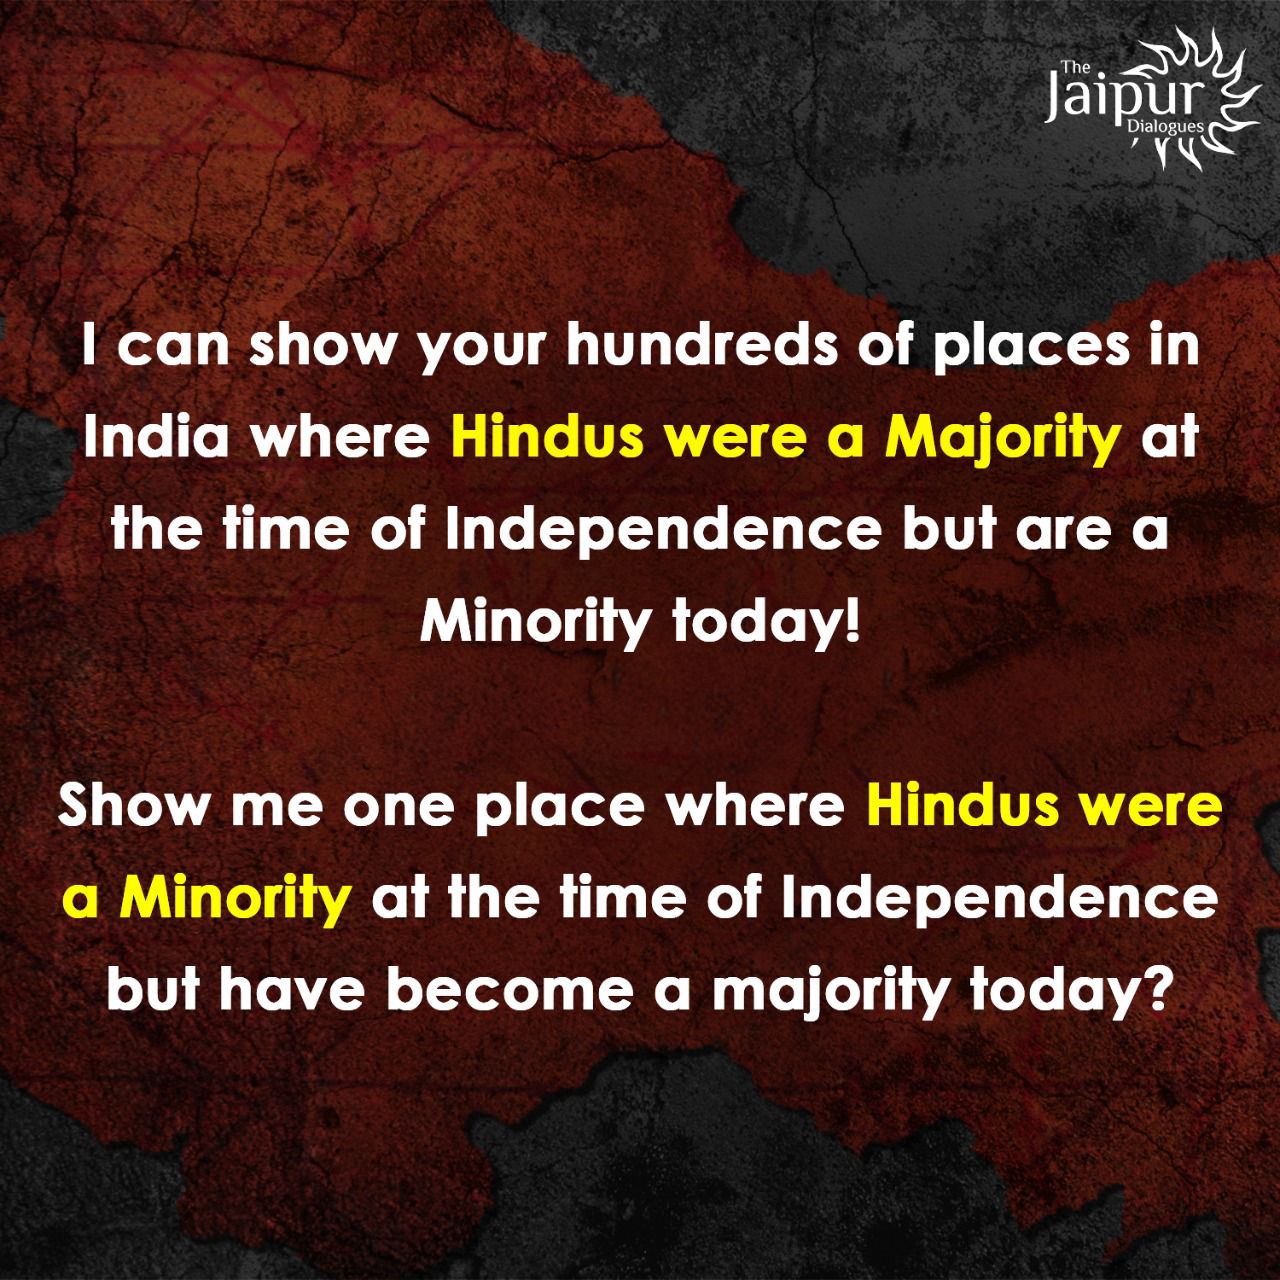 Why is the reversal always rigged against Hindus? 